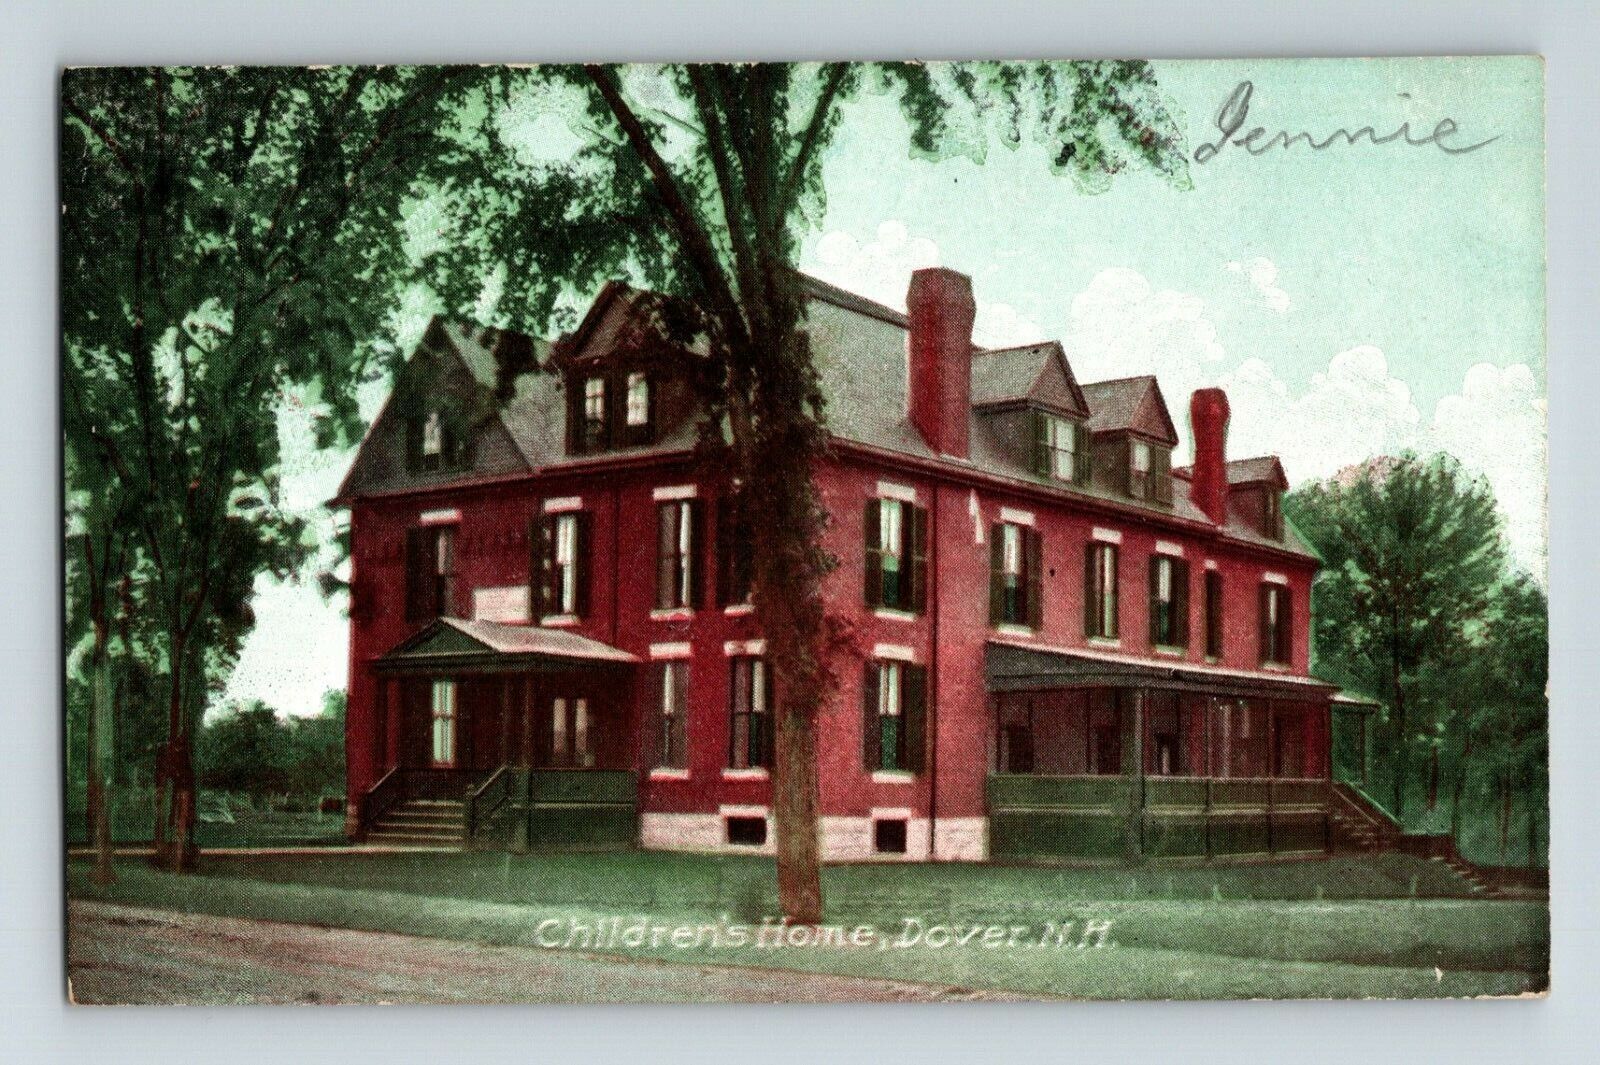 a9  Vintage Postcard Childrens Home Dover NH 197a